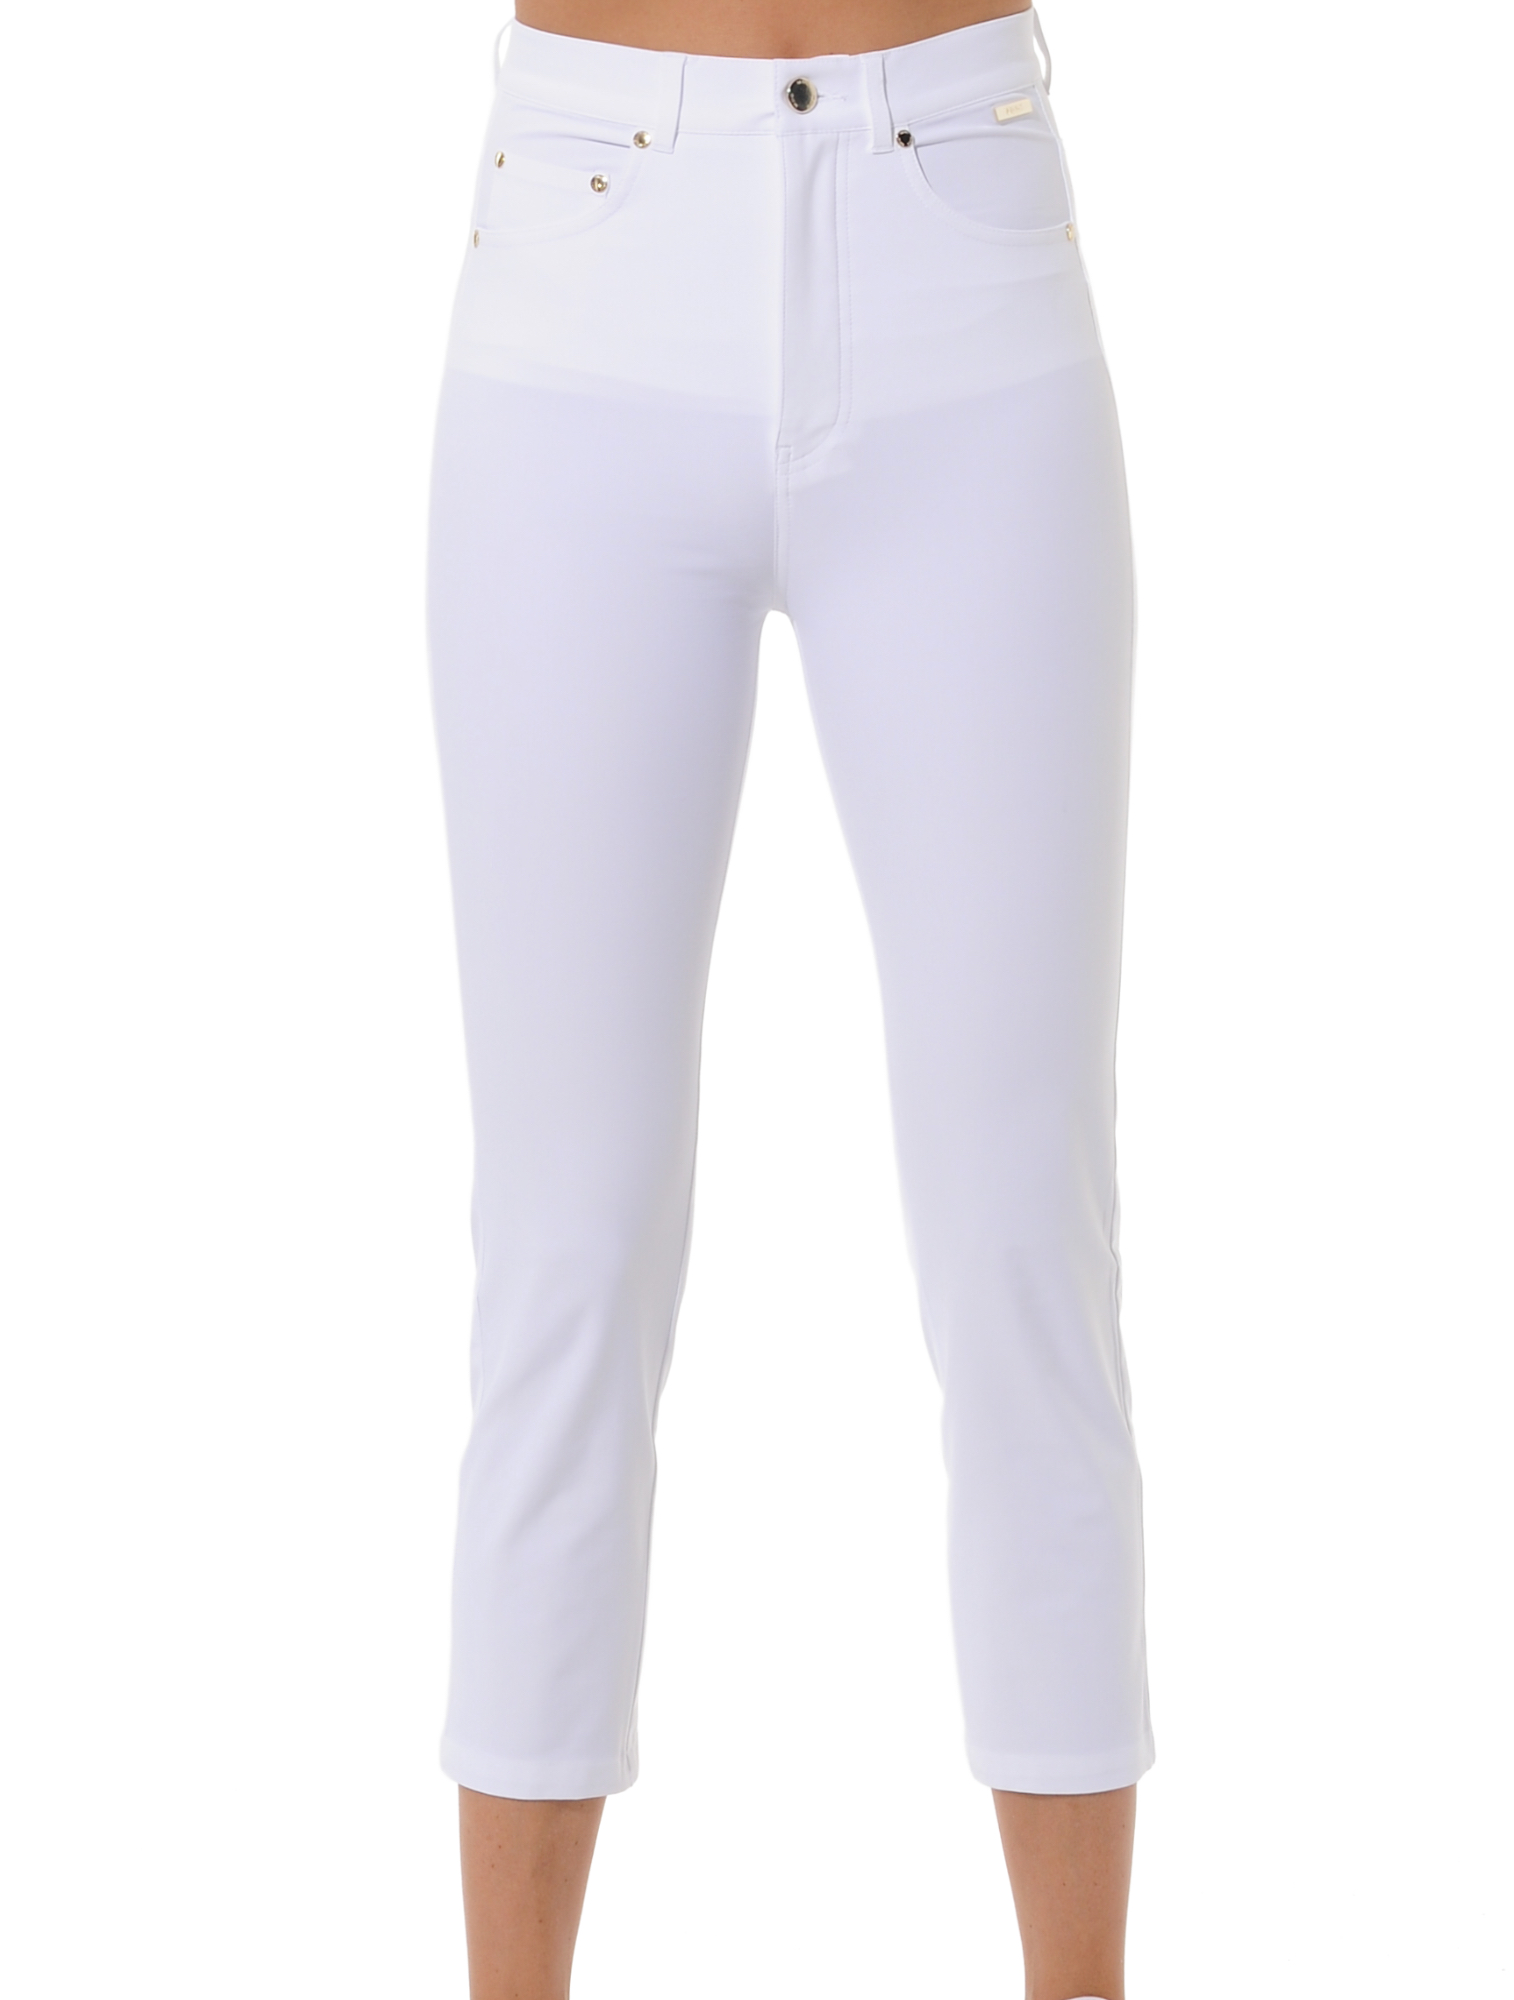 4way stretch high waist cropped pants white 